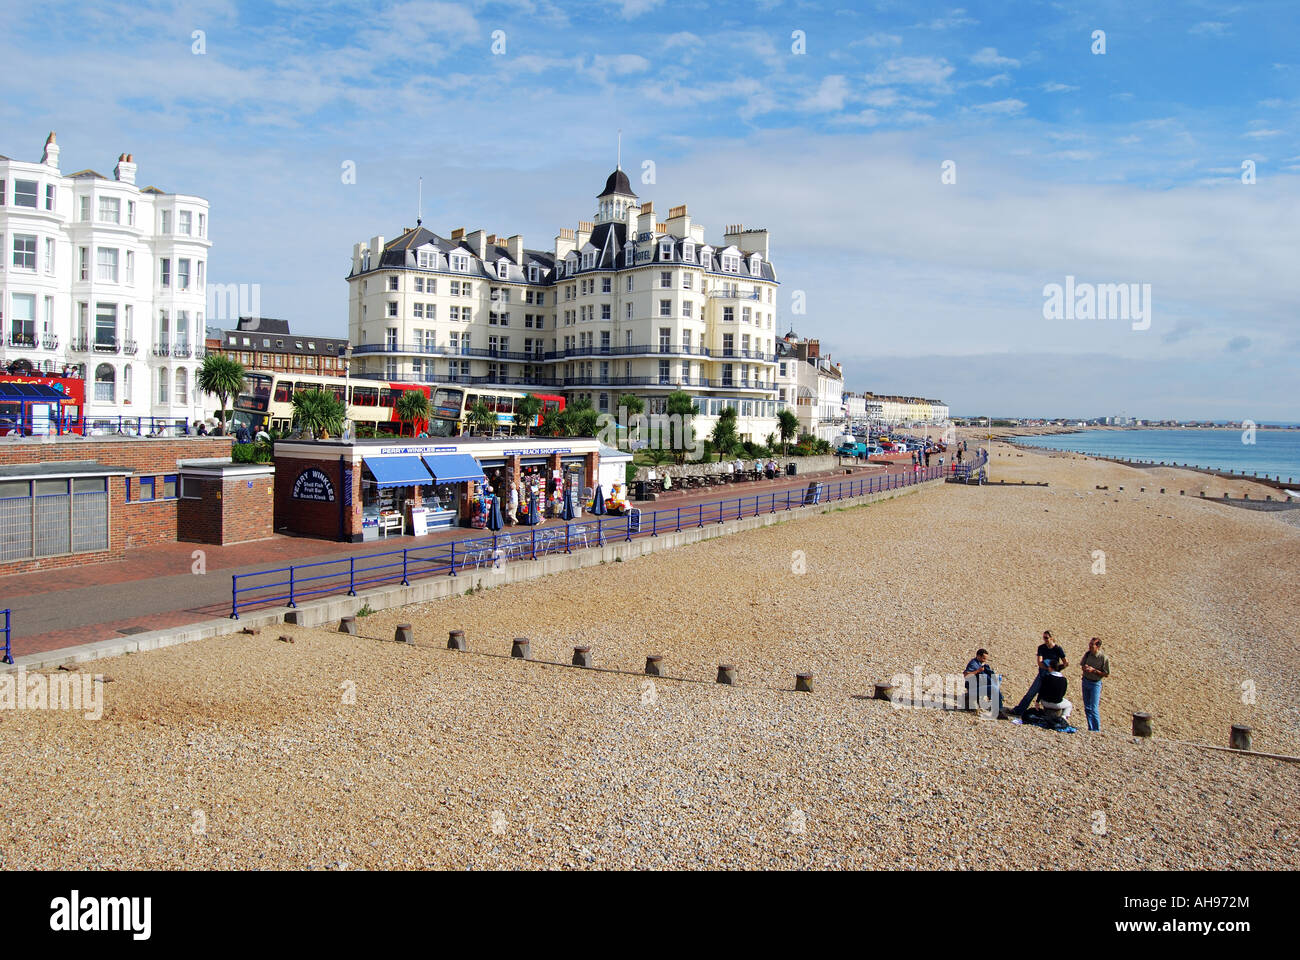 Beach and promenade from Pier, Eastbourne, East Sussex, England, United Kingdom Stock Photo